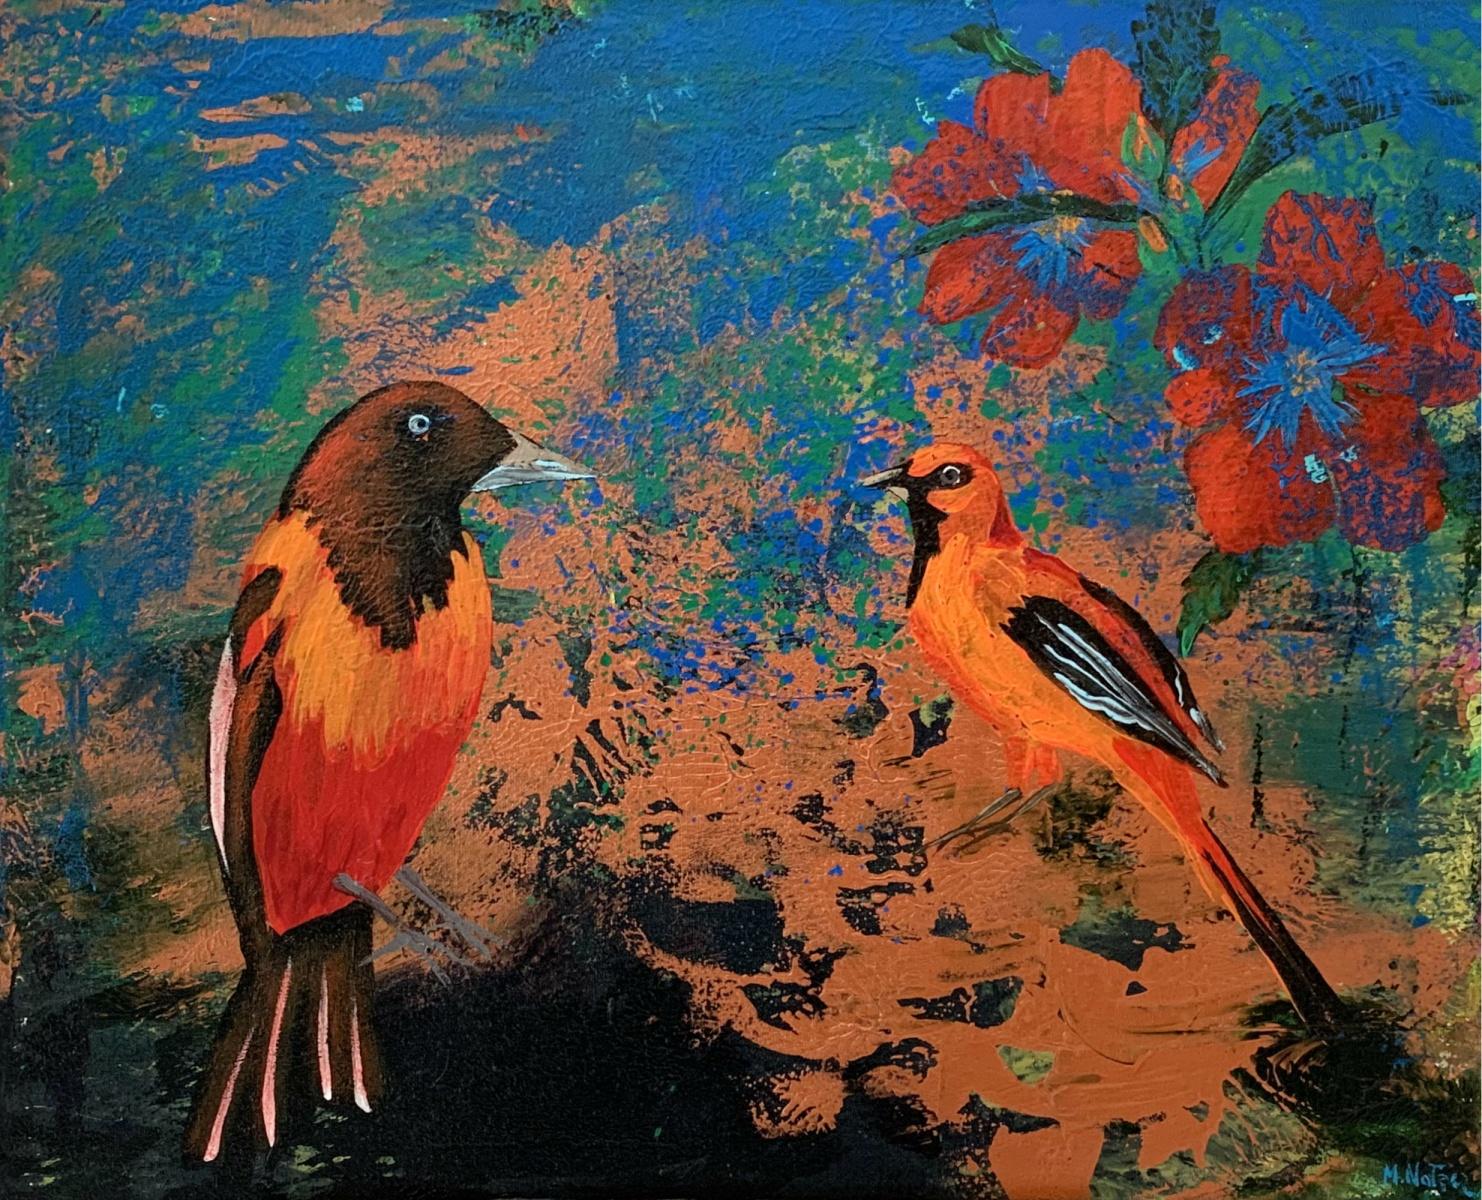 Magdalena Nałęcz Figurative Painting - Gardens of Delight LII - XXI century figurative oil painting, Birds, Colorful